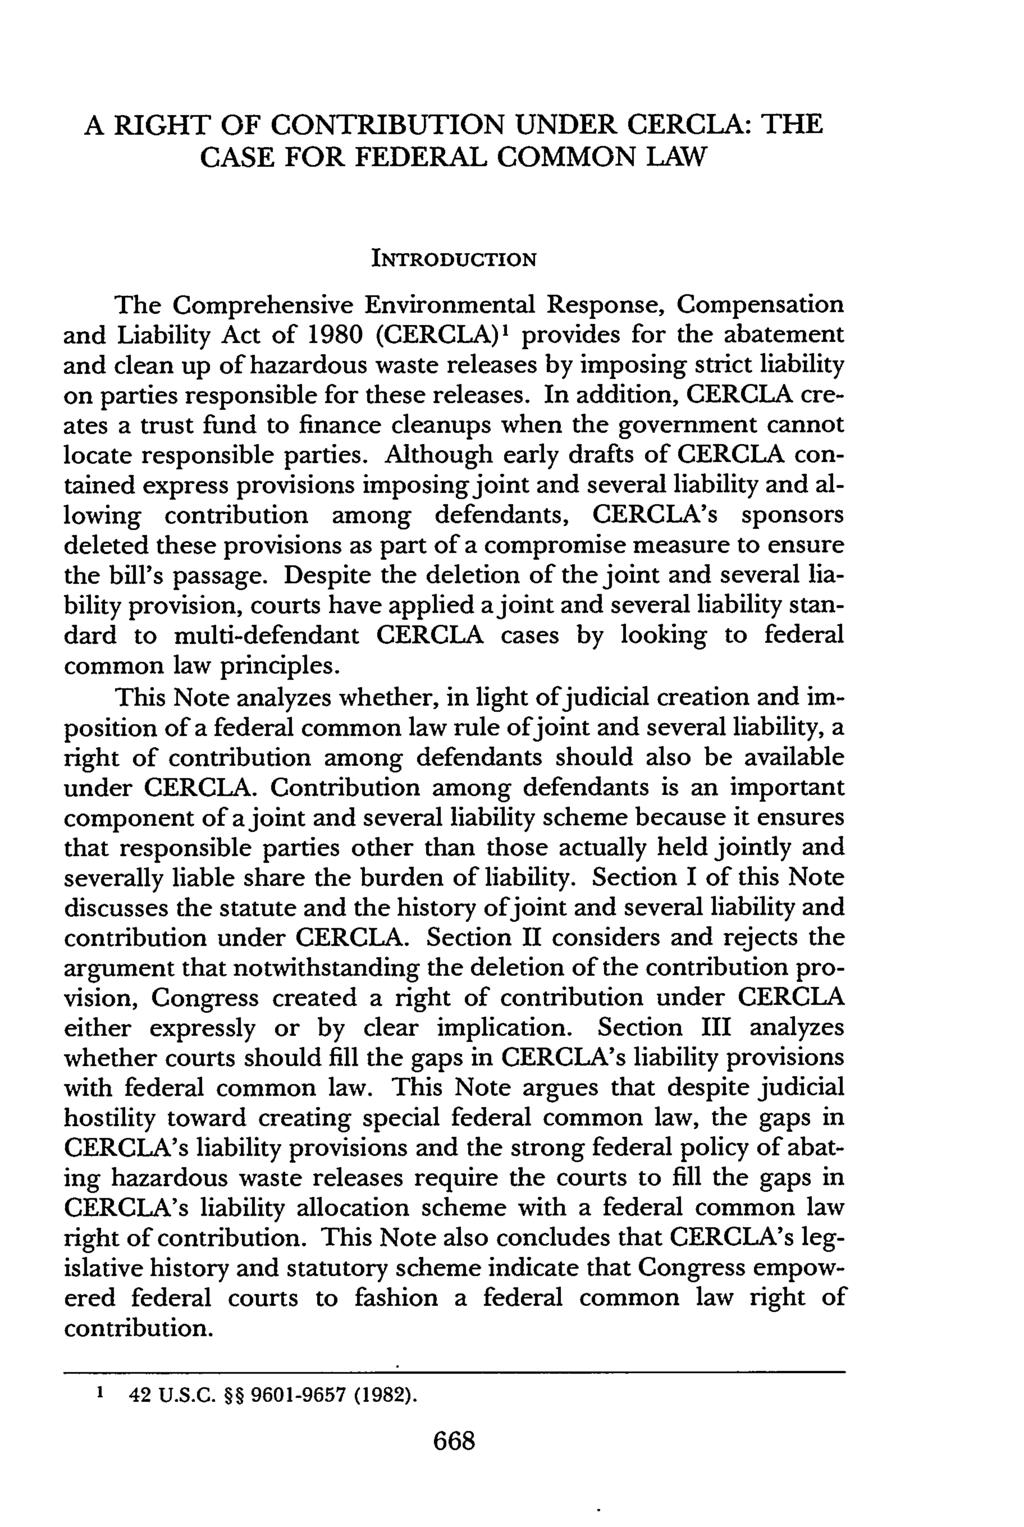 A RIGHT OF CONTRIBUTION UNDER CERCLA: THE CASE FOR FEDERAL COMMON LAW INTRODUCTION The Comprehensive Environmental Response, Compensation and Liability Act of 1980 (CERCLA) l provides for the